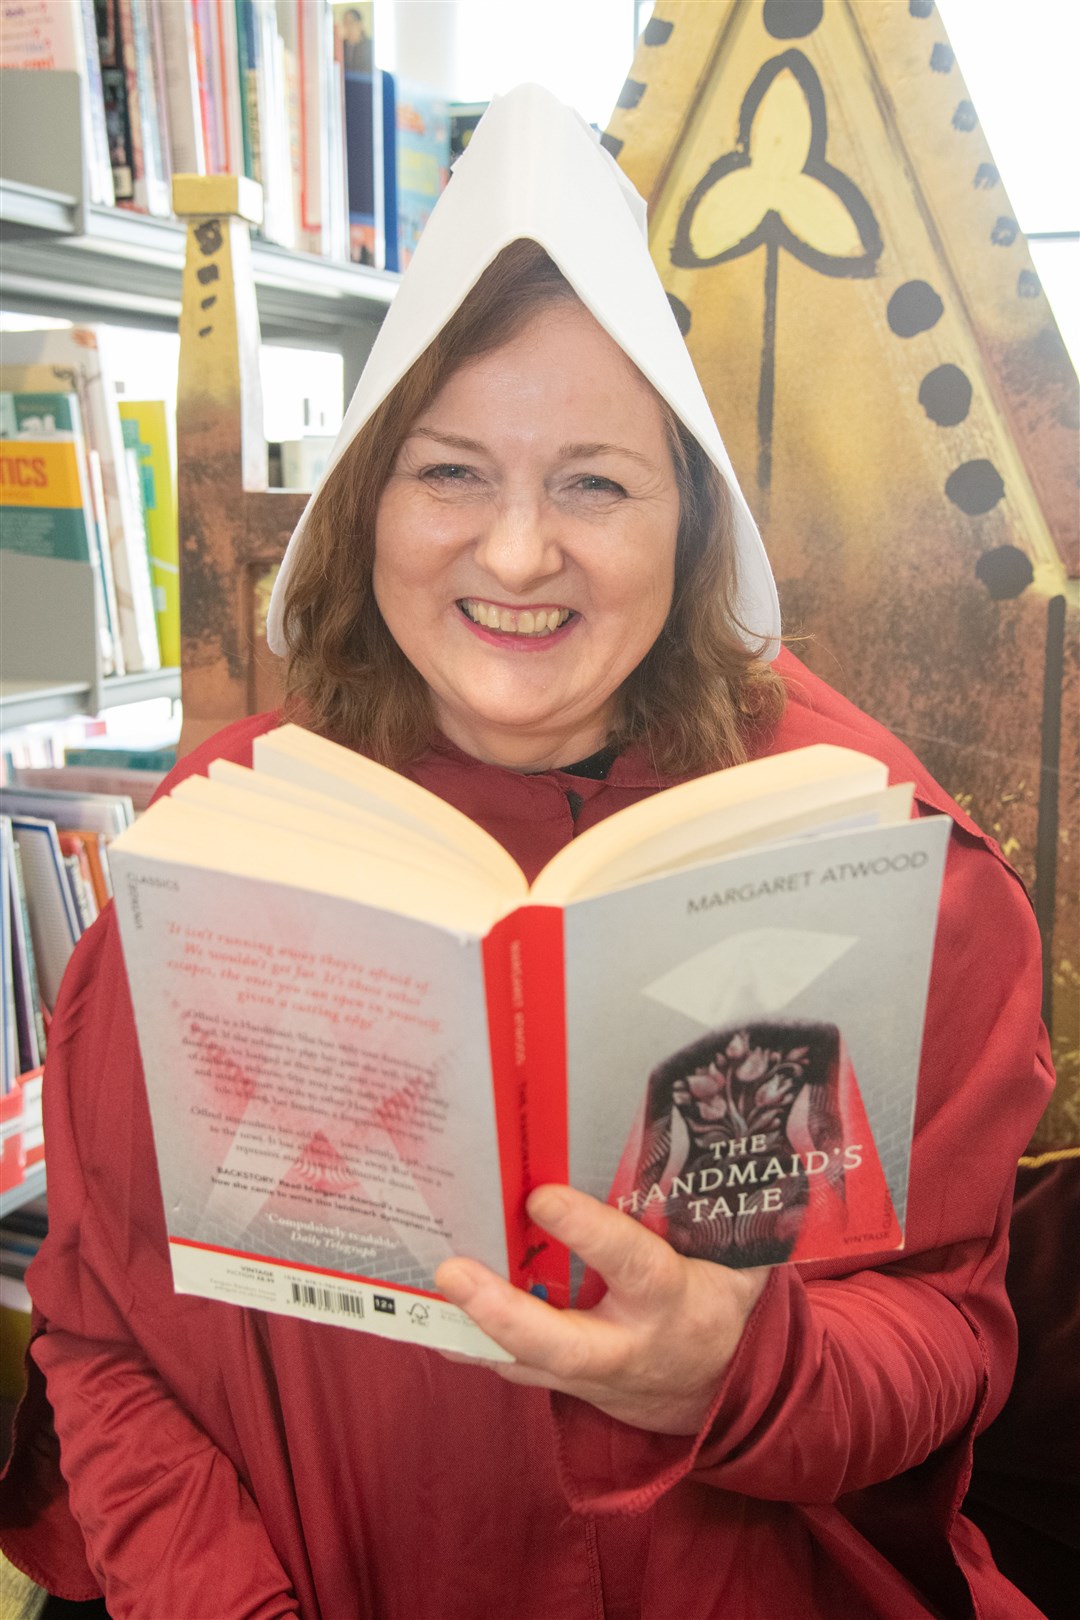 Librarian Shelagh Toonen as The Handmaid's Tale. Picture: Daniel Forsyth